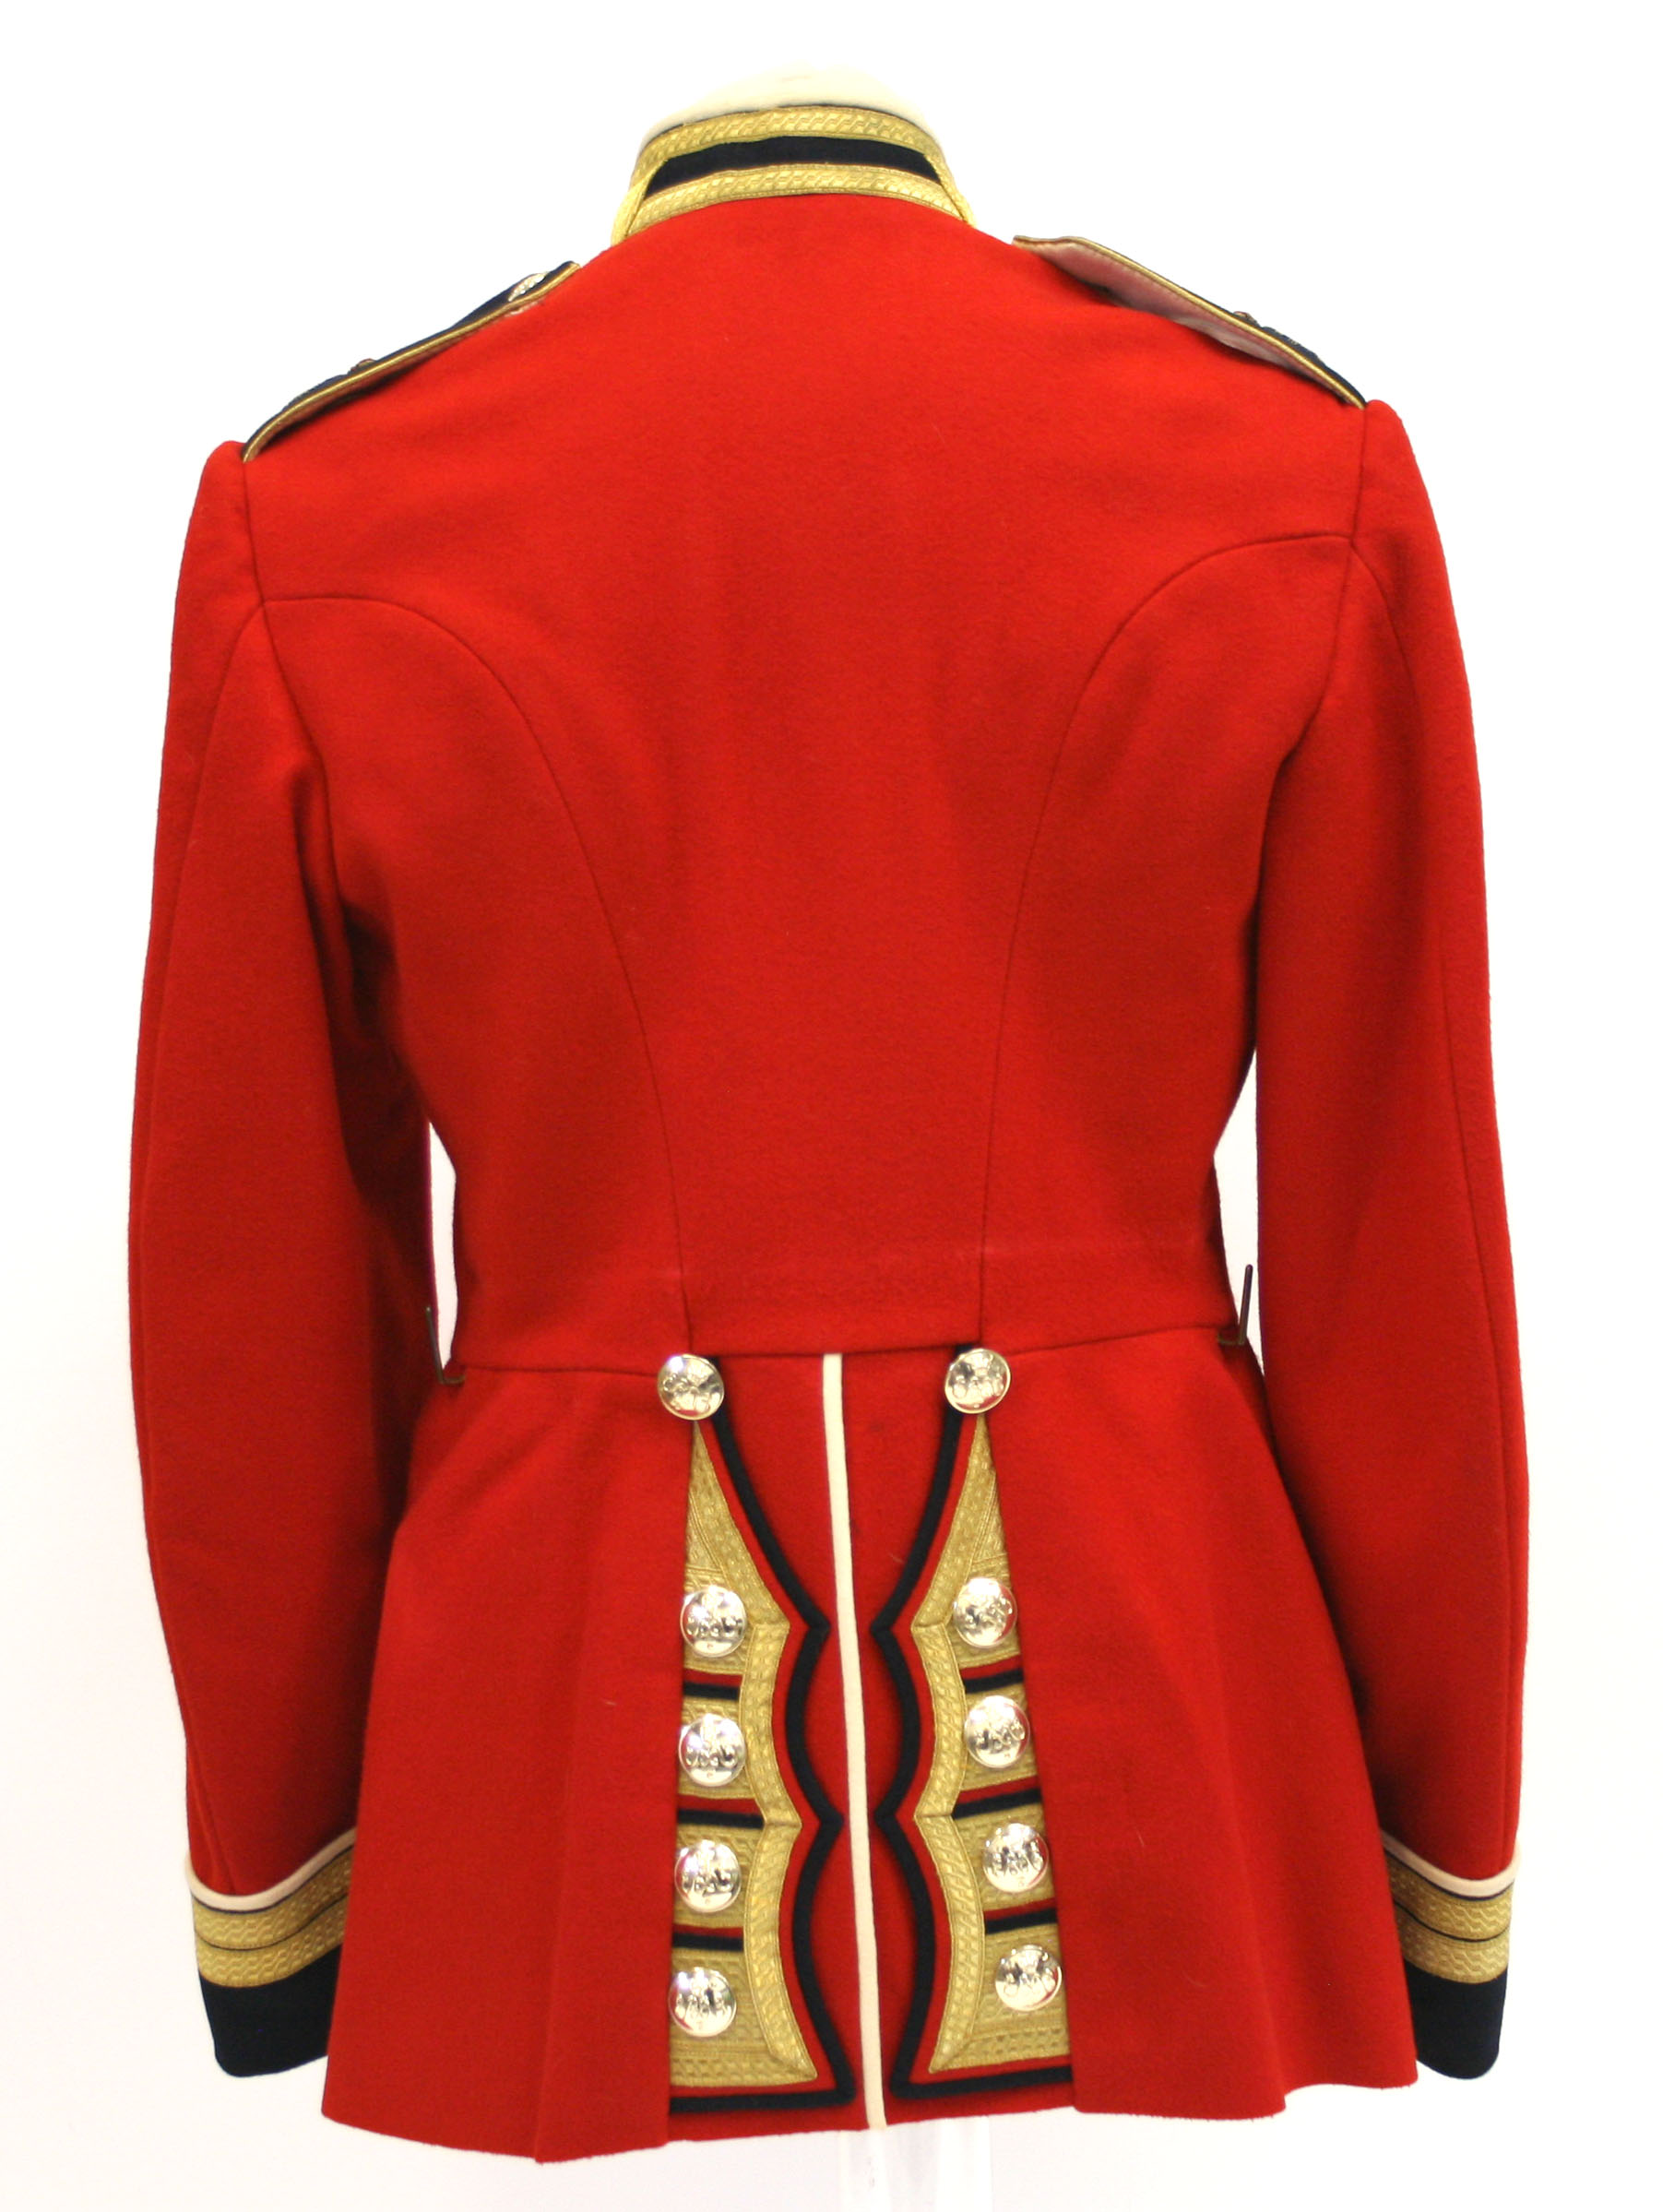 Post 1953 Grenadier Guards Colour Sergeants / Warrant Officers Dress Tunic of fine red cloth with - Image 5 of 5